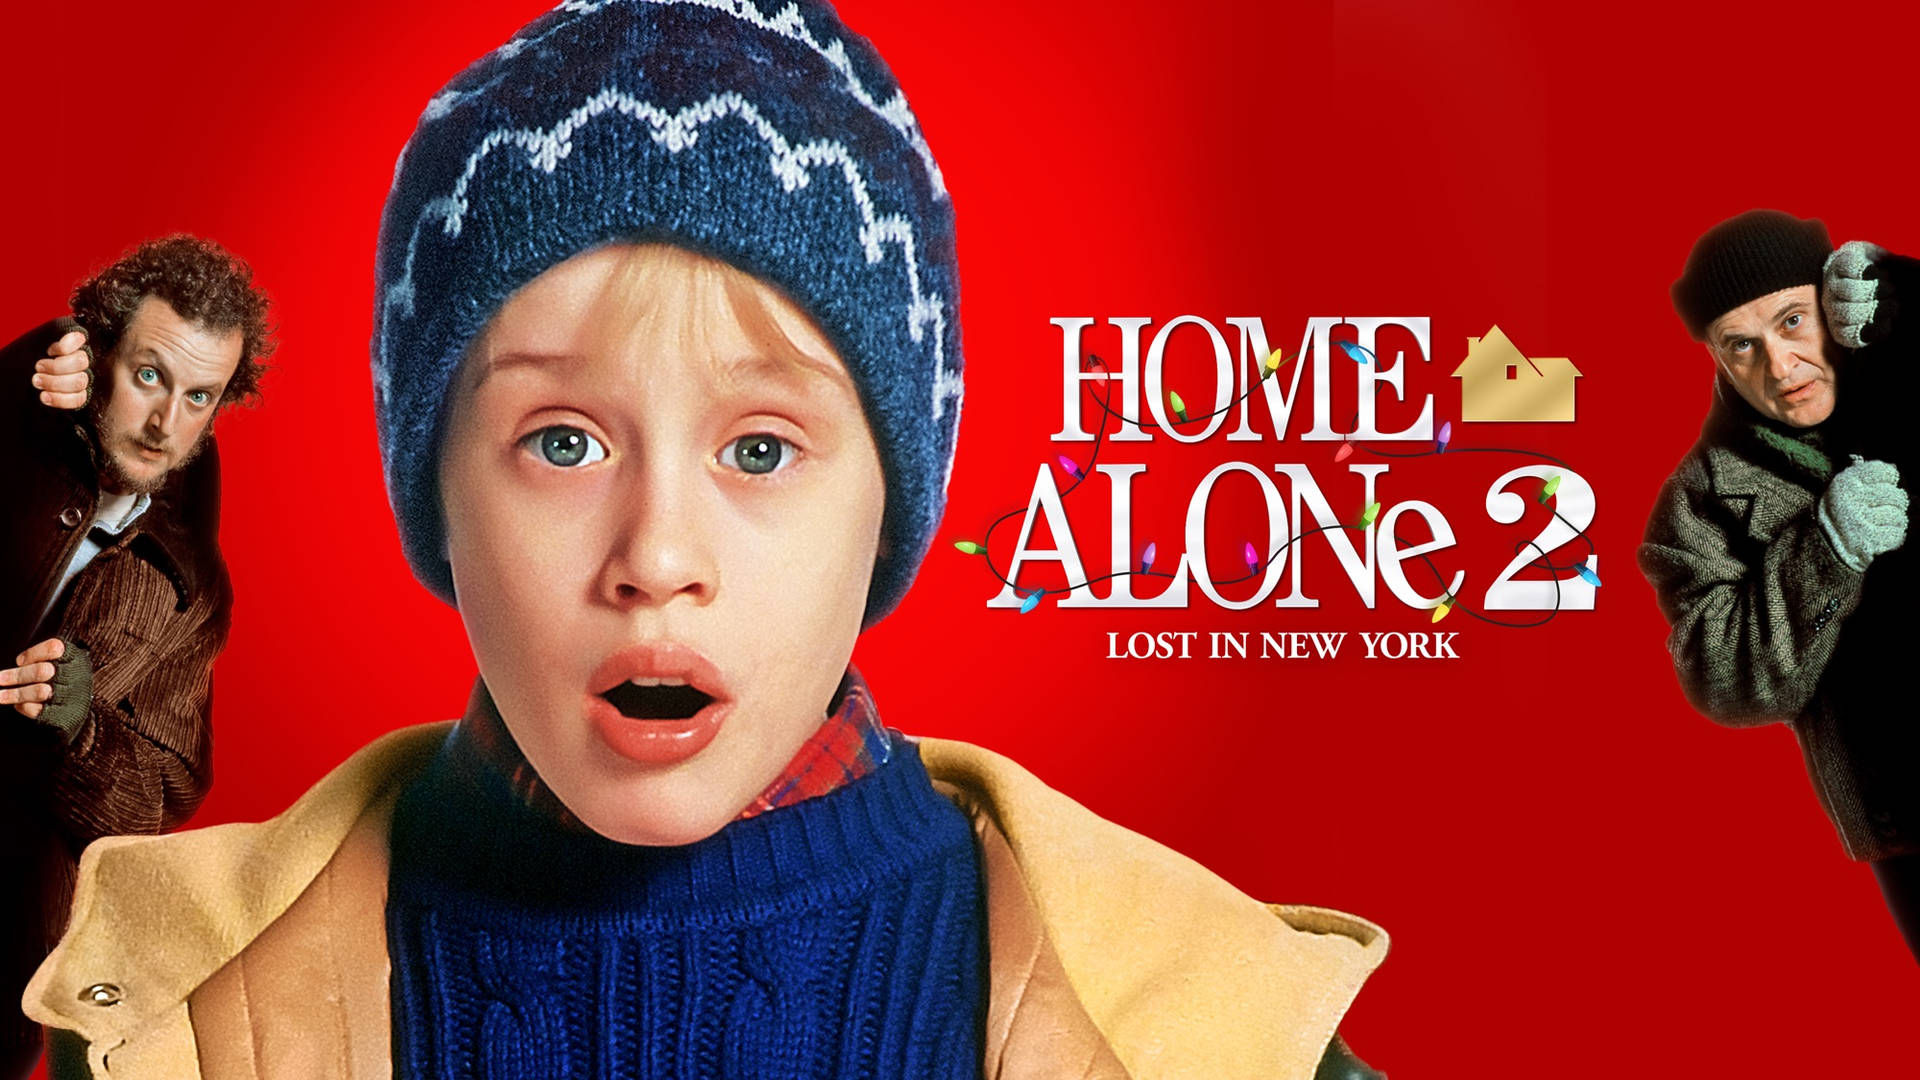 Home Alone 2 Promotional Poster Background